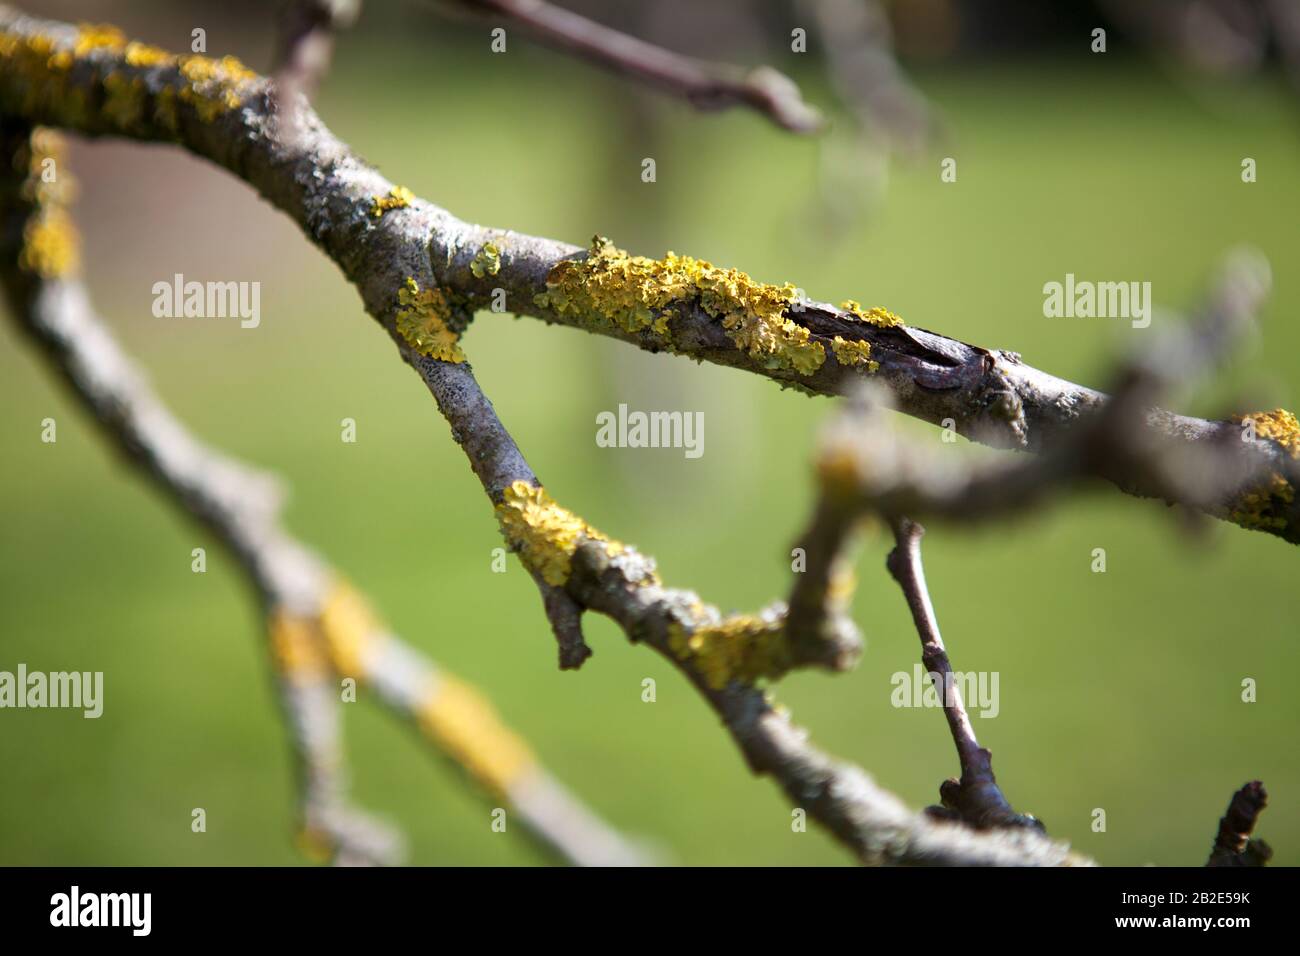 An apple tree close up, showing the lichens growing on the branches Stock Photo